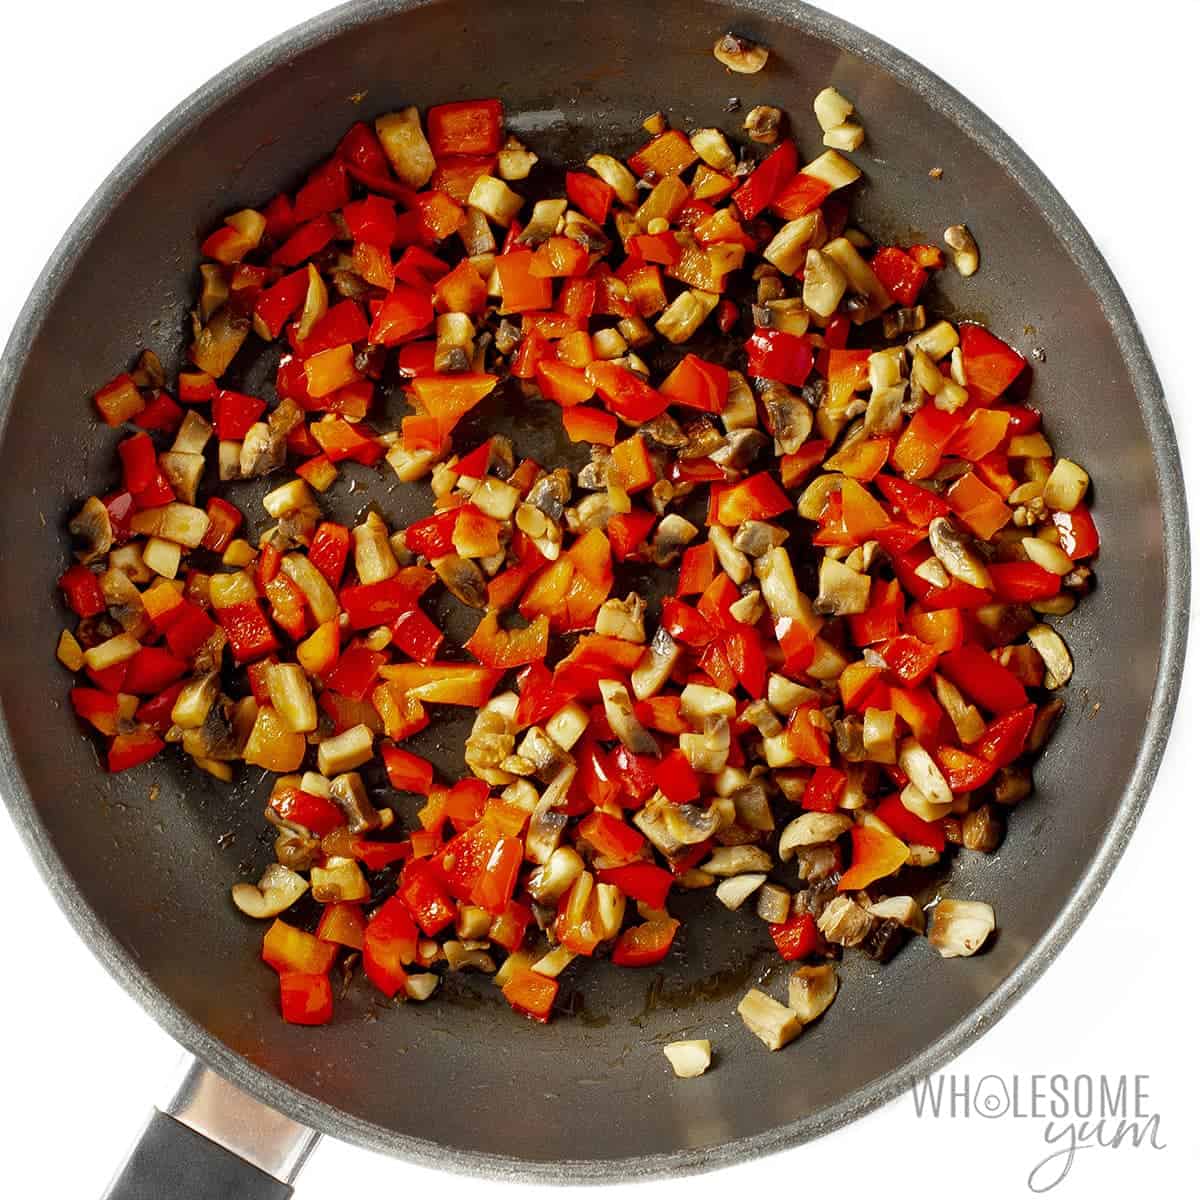 Sauteed vegetables in skillet.